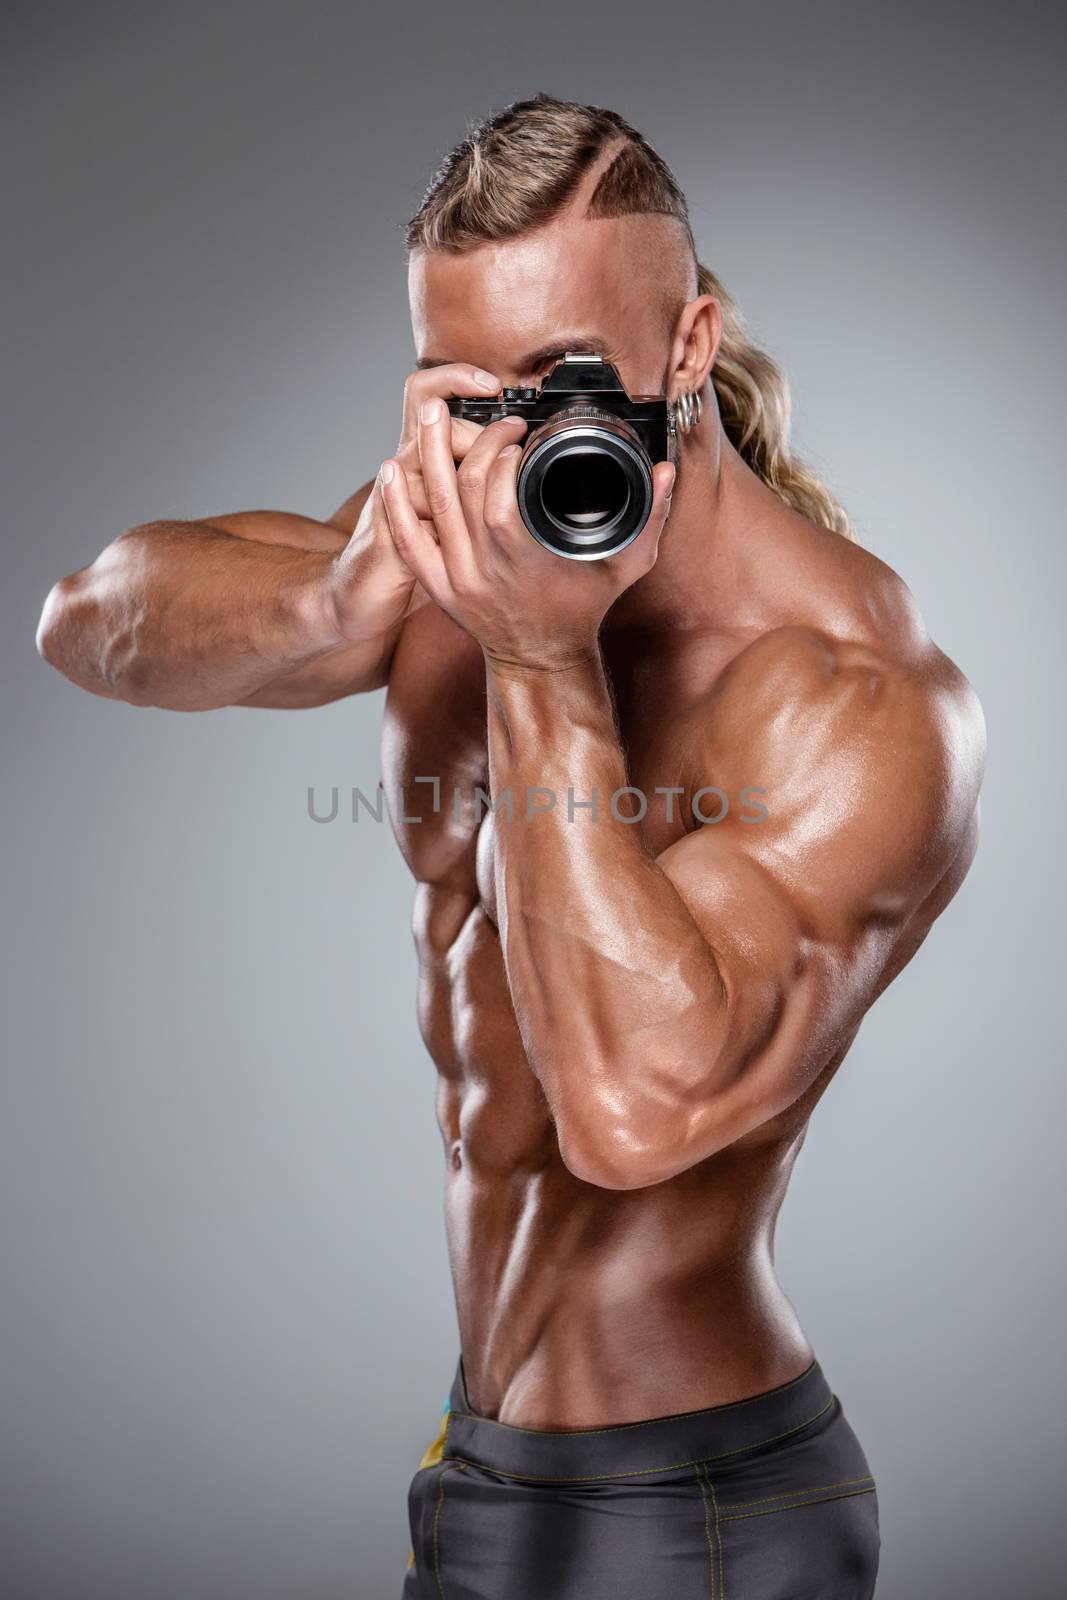 Attractive male body builder as photograph holding a camera on gray background